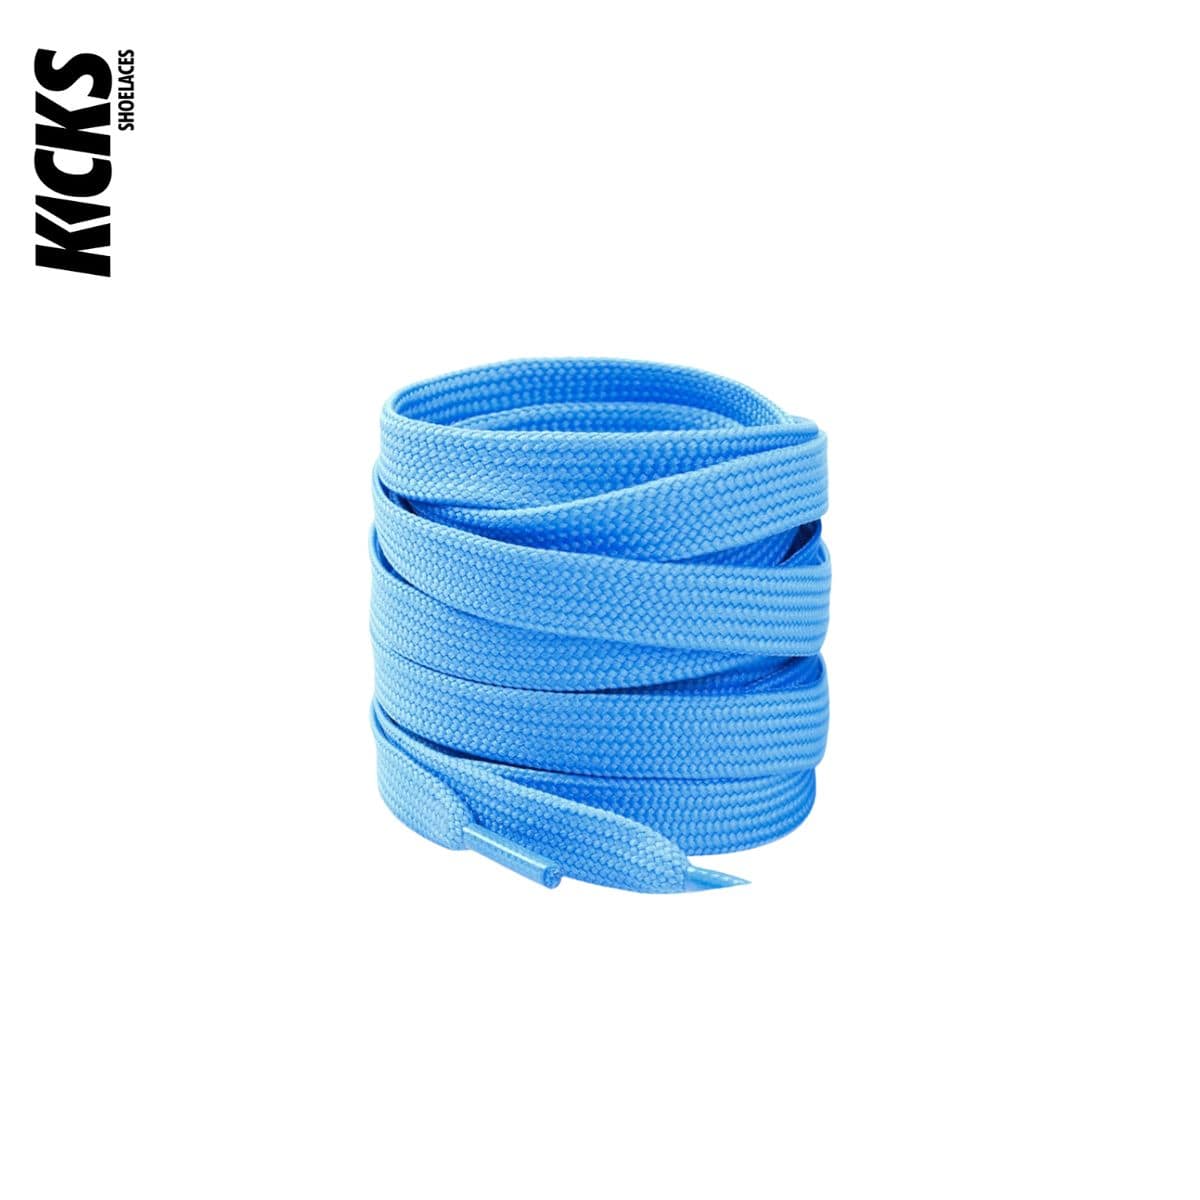 Sky Blue Replacement Laces for Adidas EQT Sneakers by Kicks Shoelaces